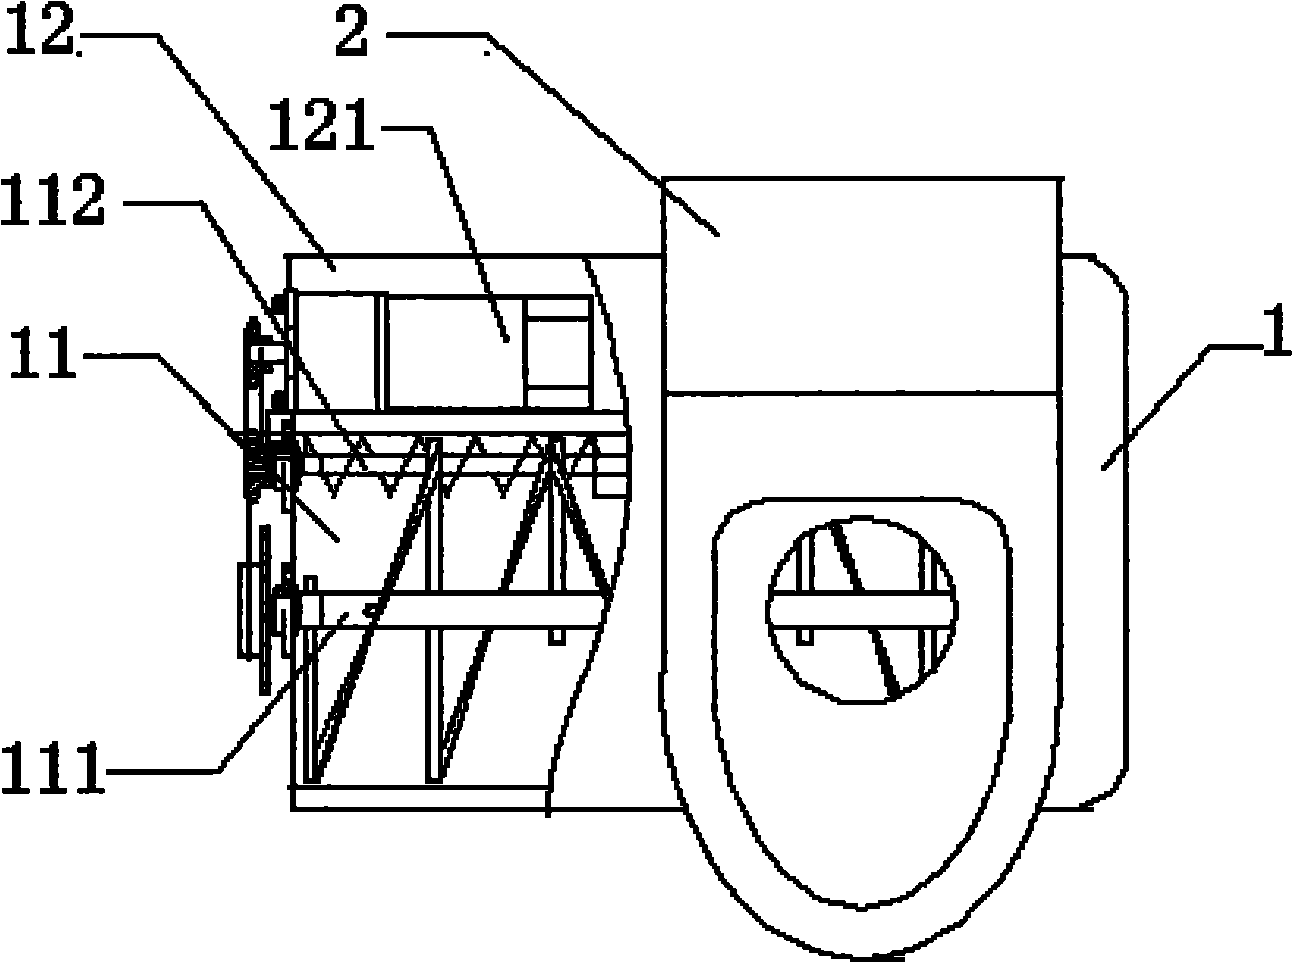 Ecological toilet suitable for locomotive or steamship drivers